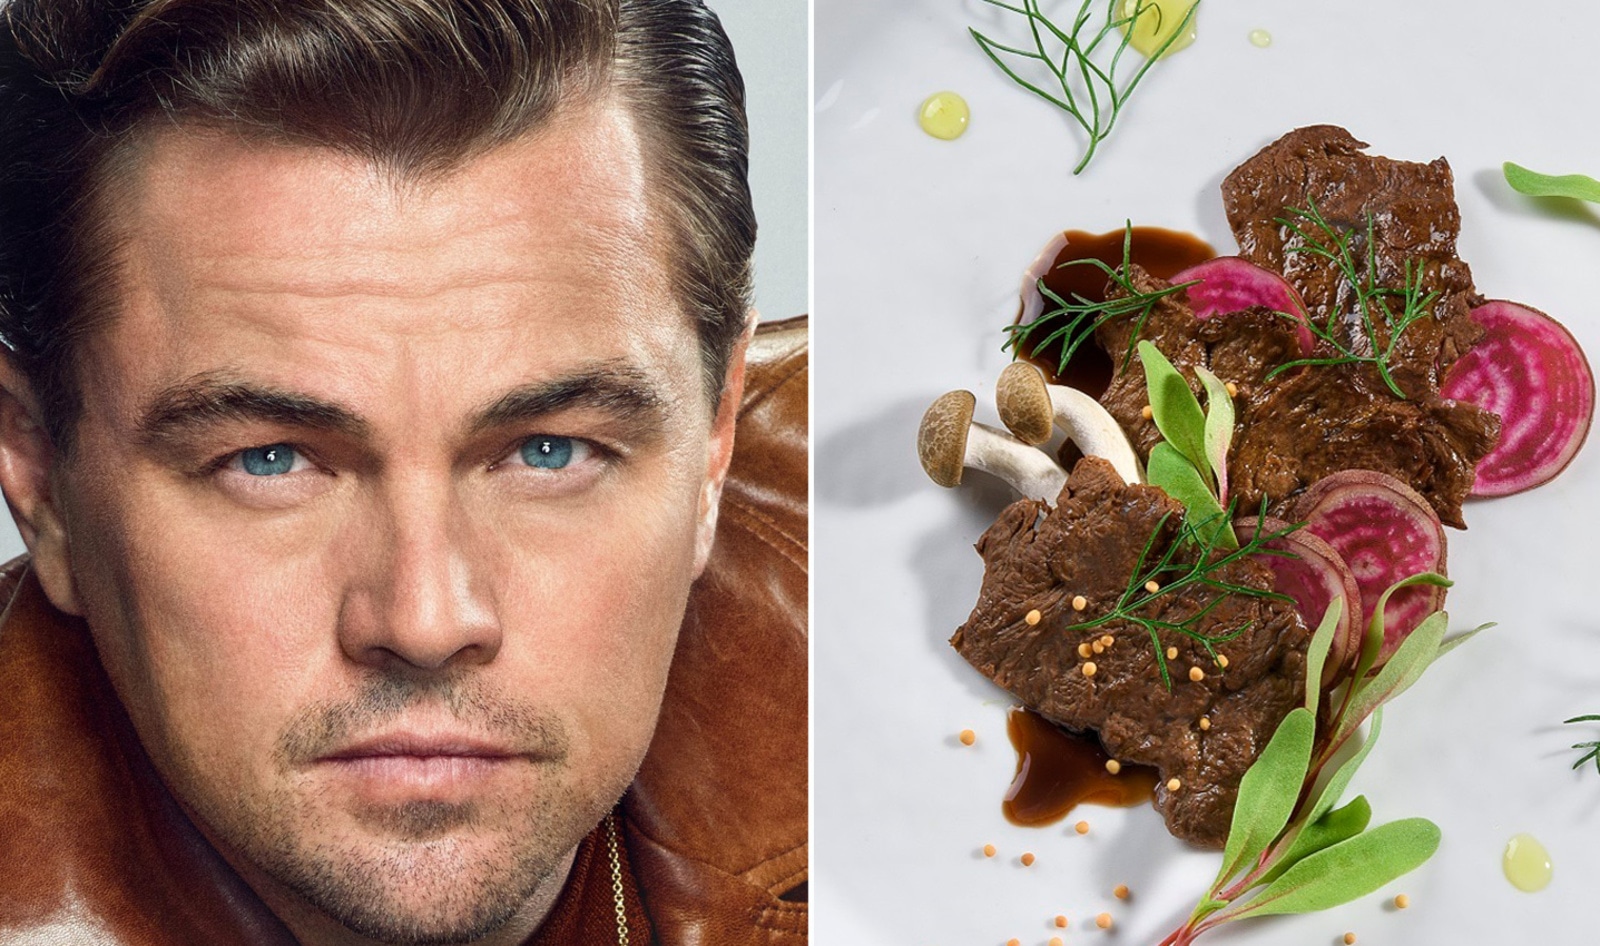 Leonardo DiCaprio Wants to Save the Planet. He Just Invested in 2 Cell-Based Meat Companies to Help Do It.